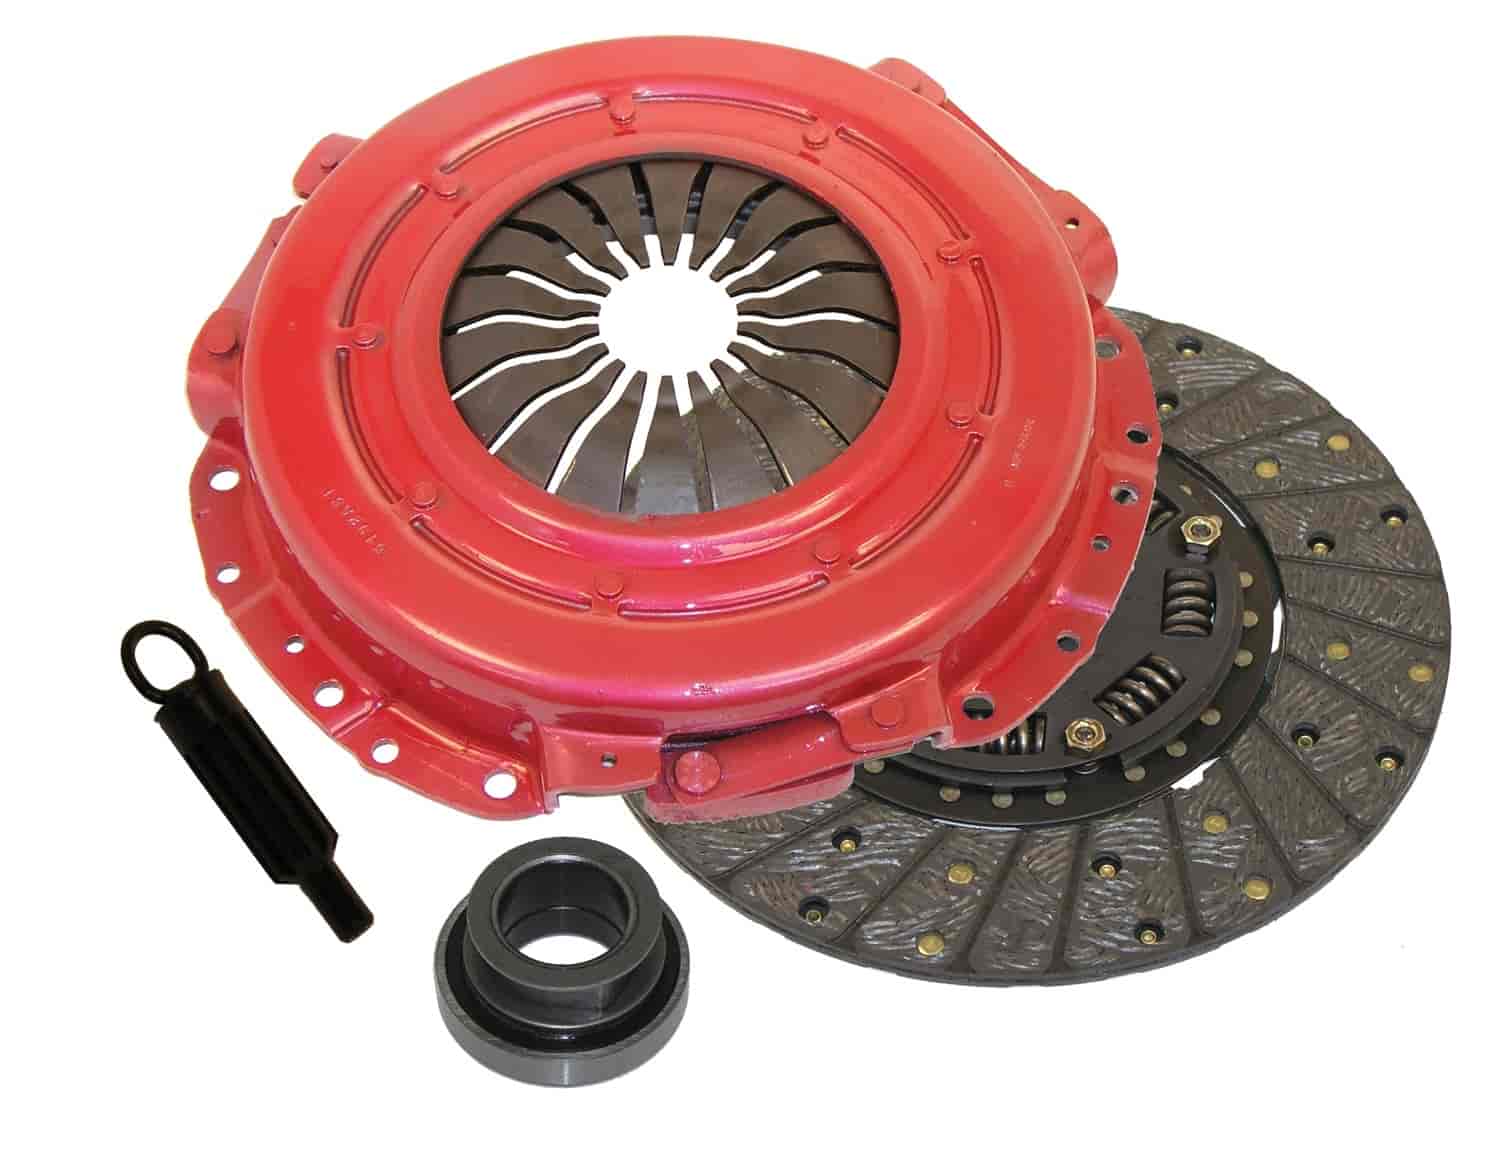 Premium OEM Replacement Clutch Kit 1999-2004 Ford Mustang 4.6L (8-Bolt Flywheel)